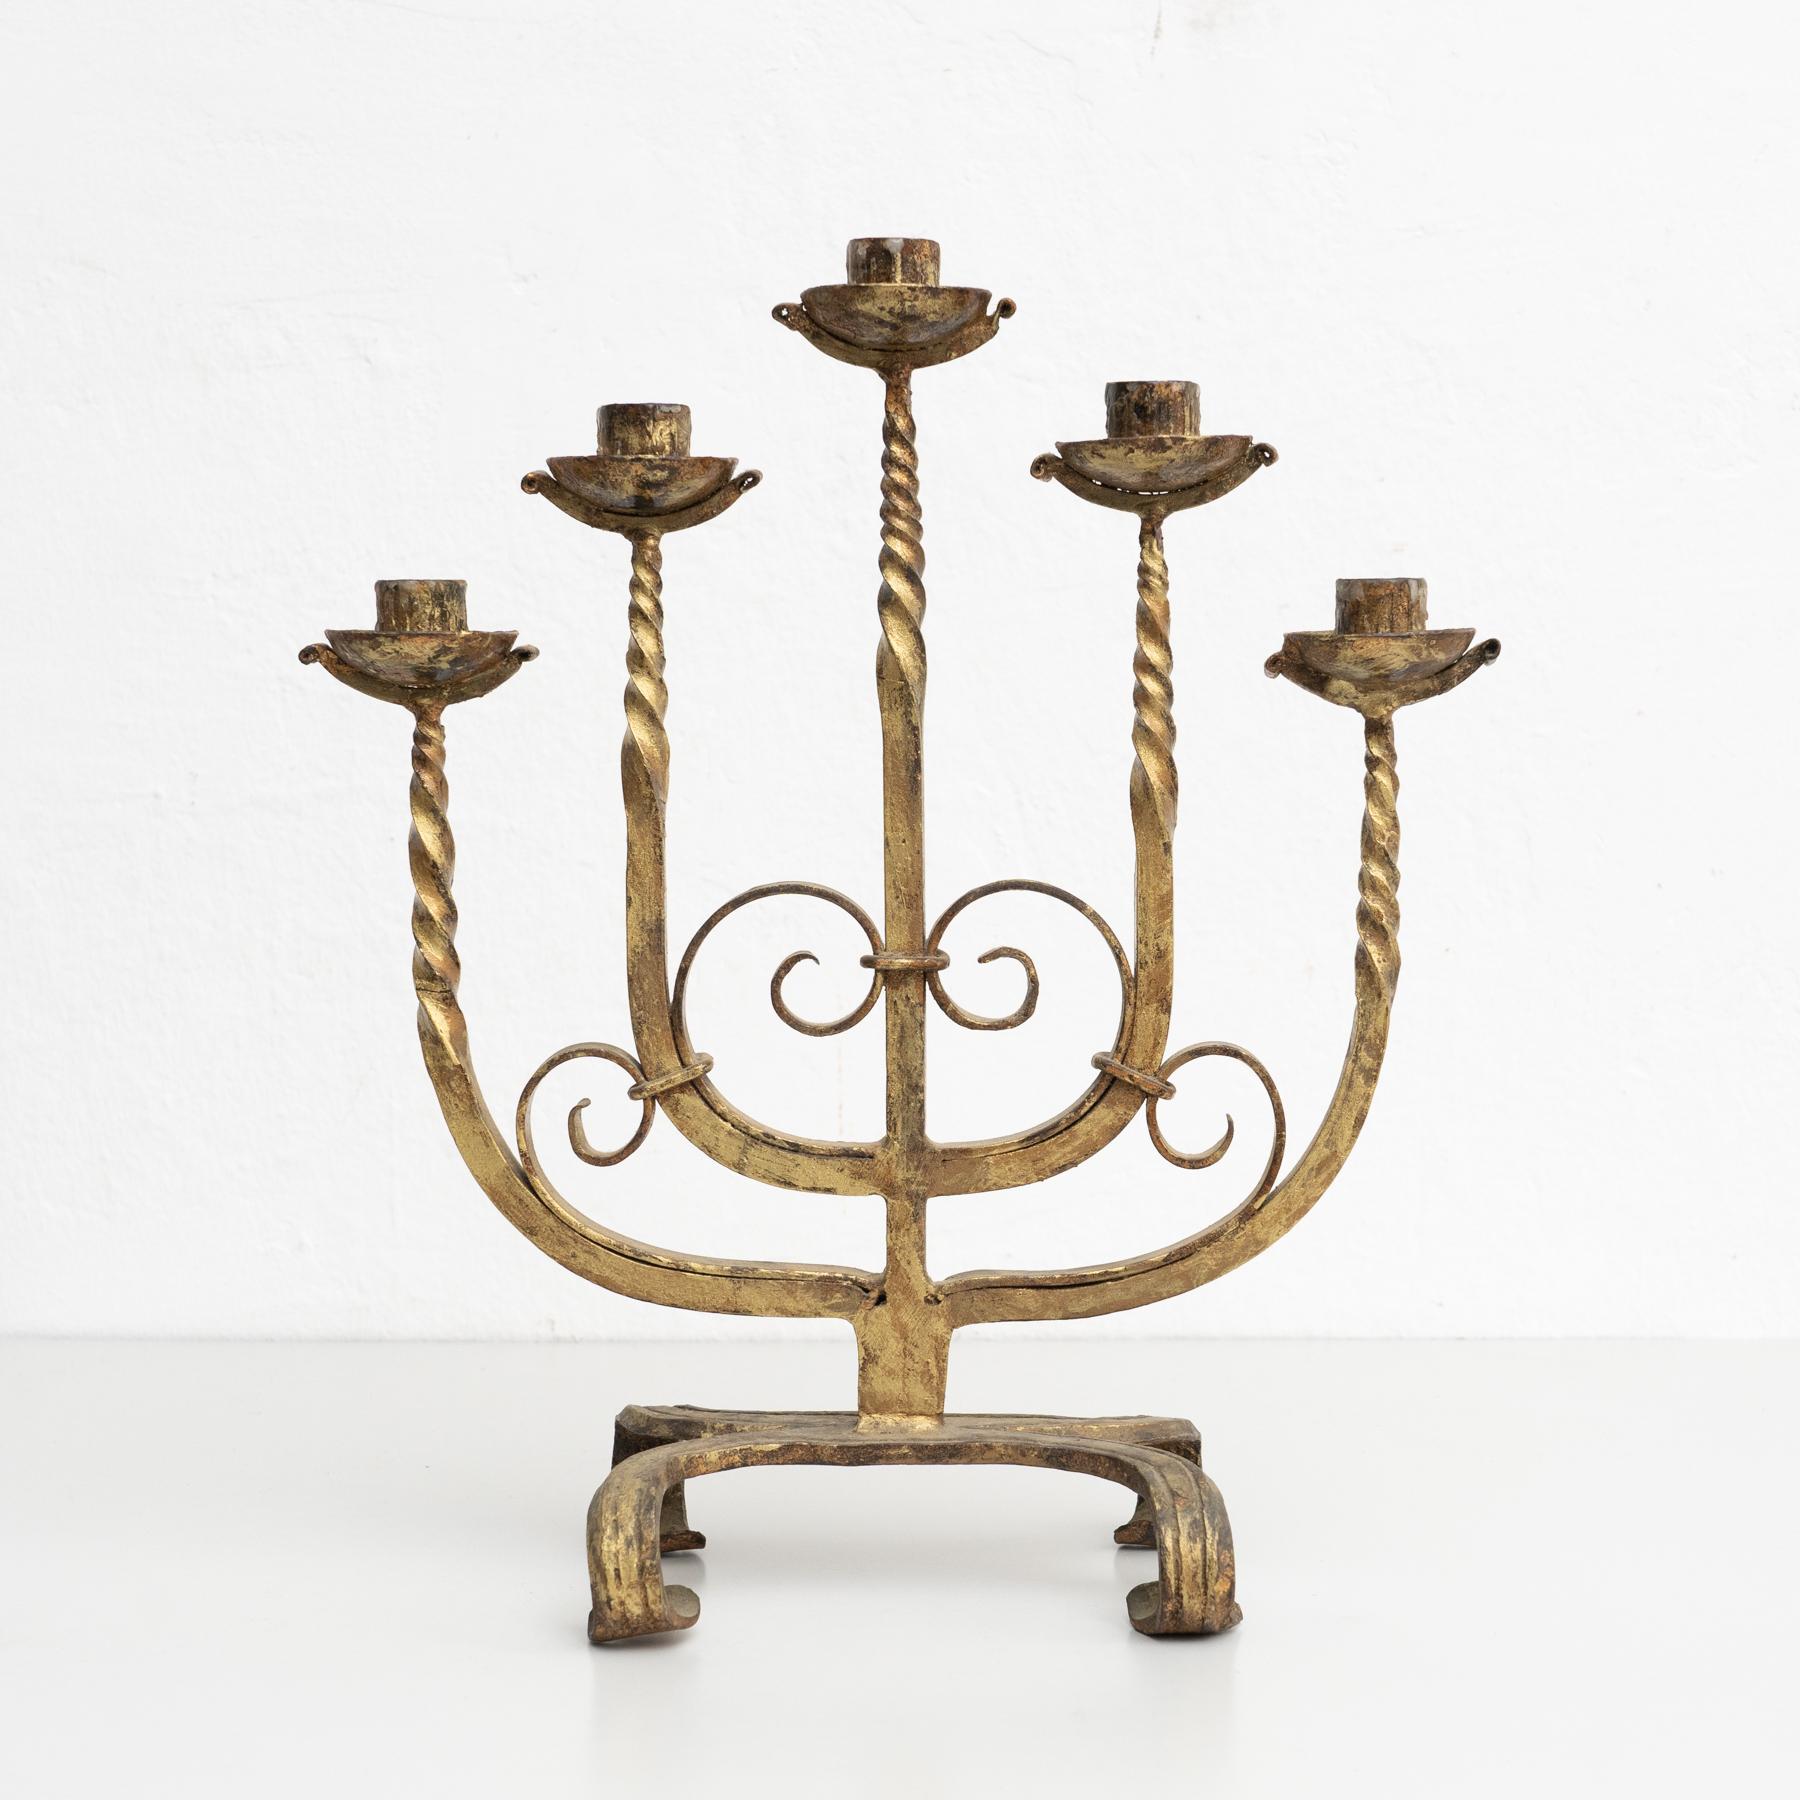 Rustic metal candle holder, circa 1940

Made by unknown manufacturer in Spain.

In original condition, with minor wear consistent with age and use, preserving a beautiful patina.
  
Material:
Metal.

